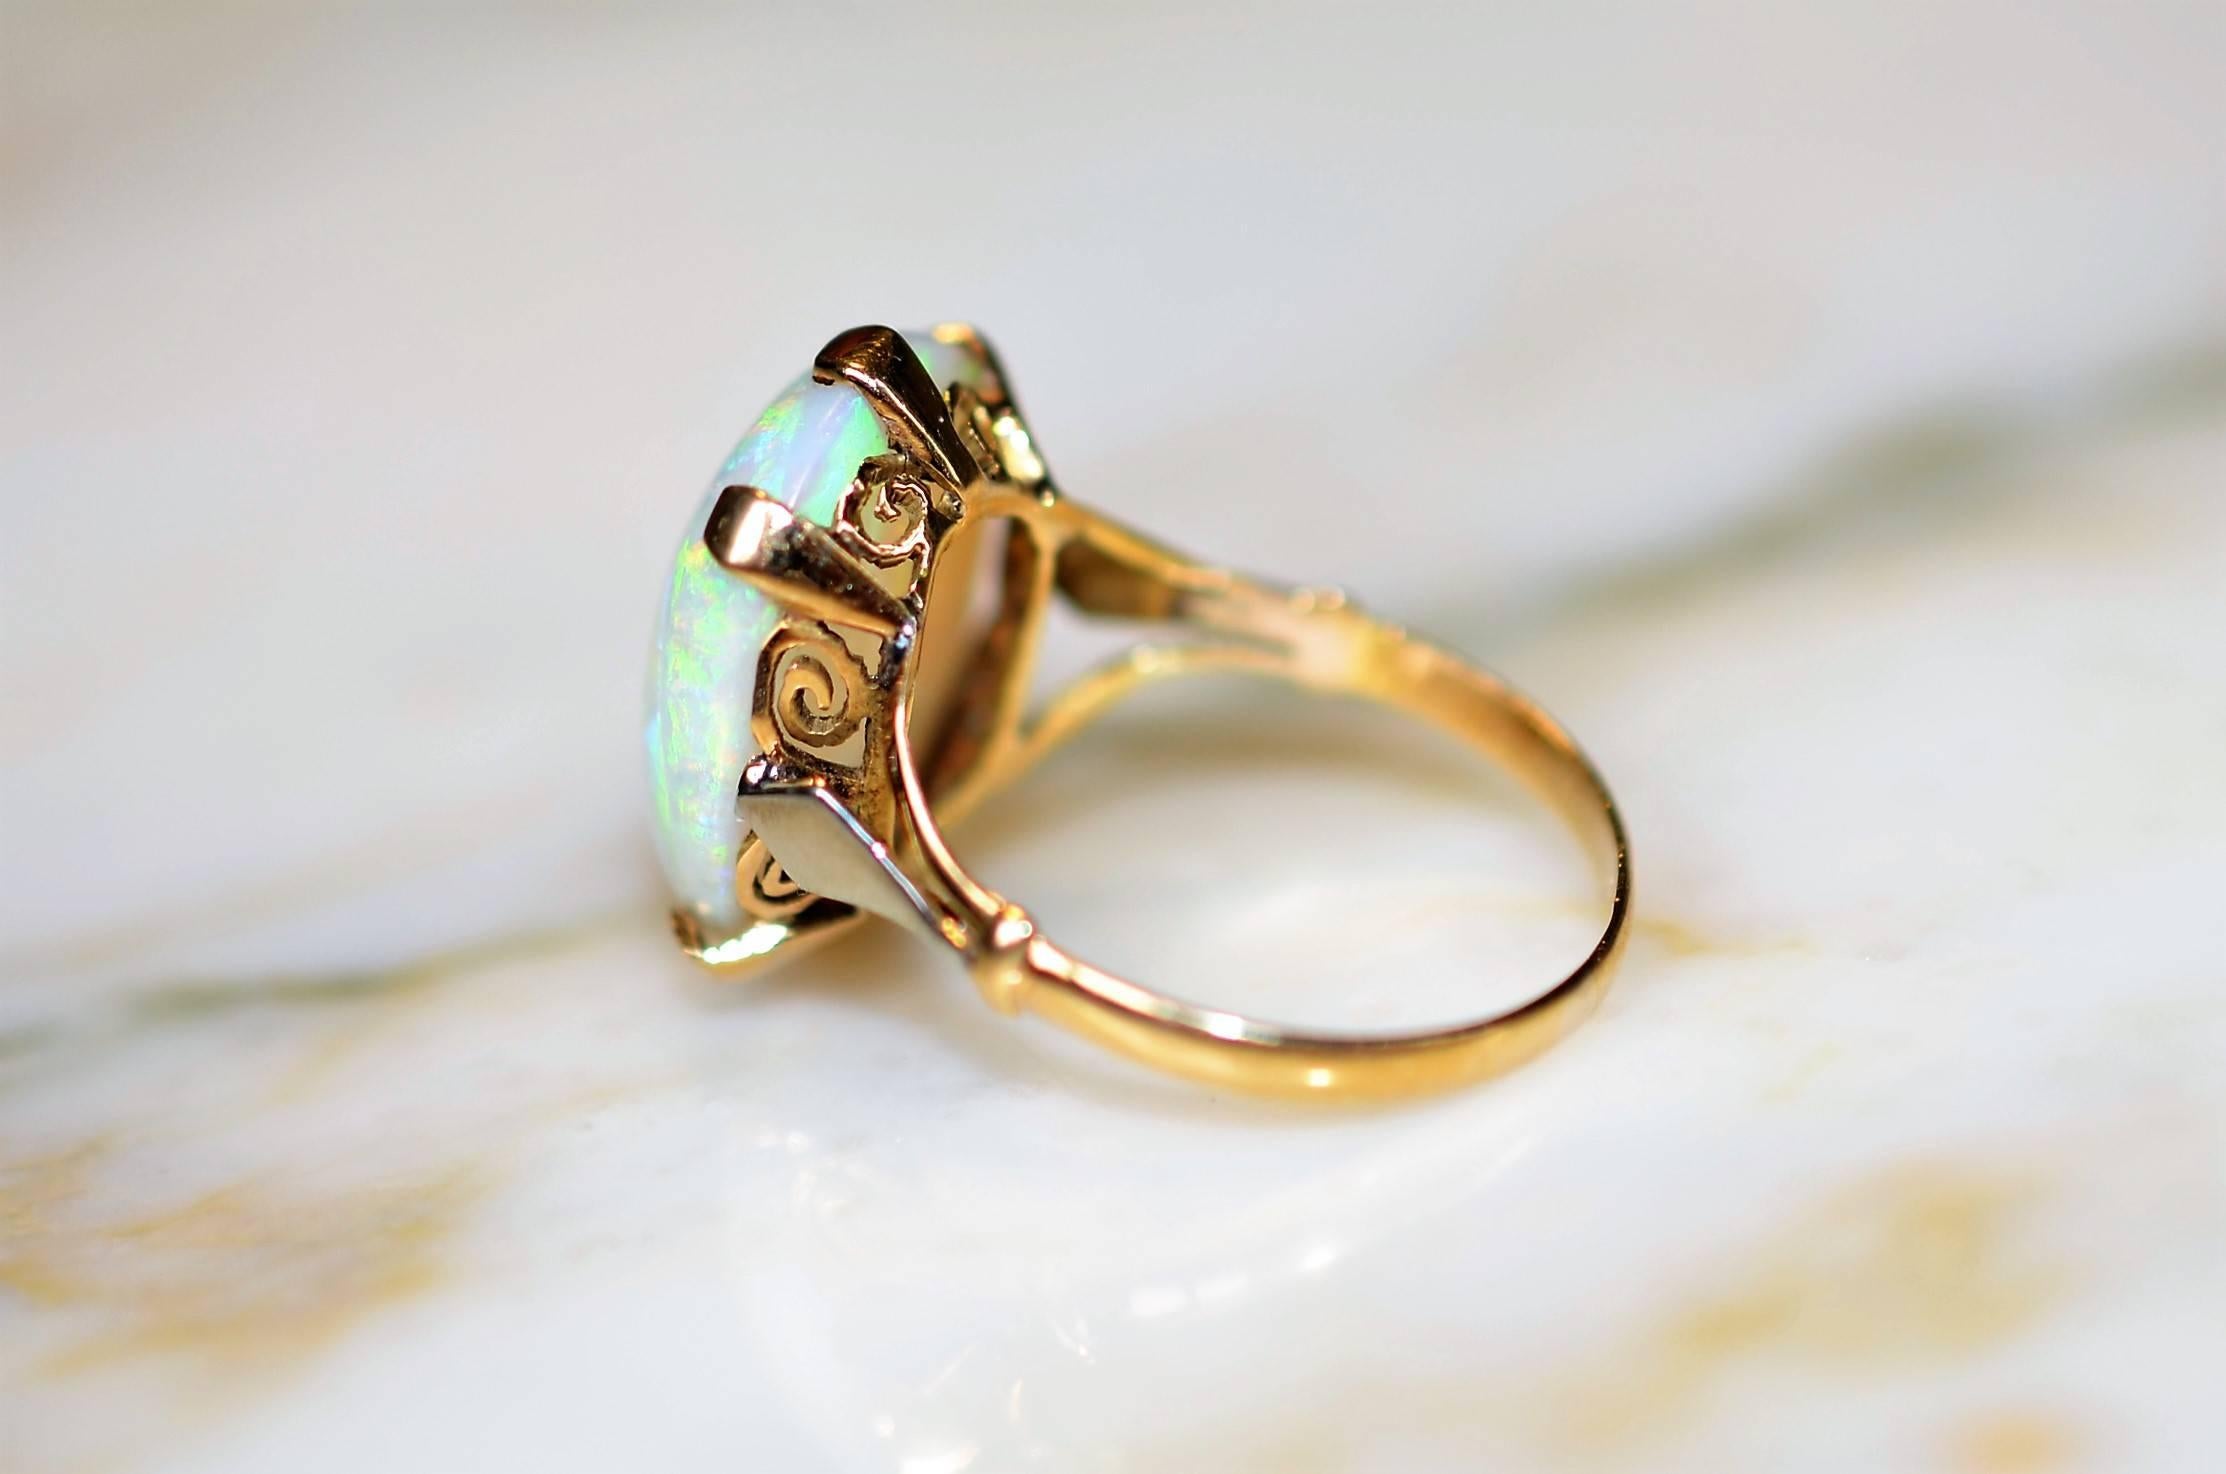 Superb ring in yellow gold 18-karat adorned with a beautiful opal.
Stone of extraordinary brightness and an intensity that is incredible.
Very good jewellery in excellent condition. Punch the head of an eagle.

 
Size 52
Stone: 1.7 x 1.3 cm.